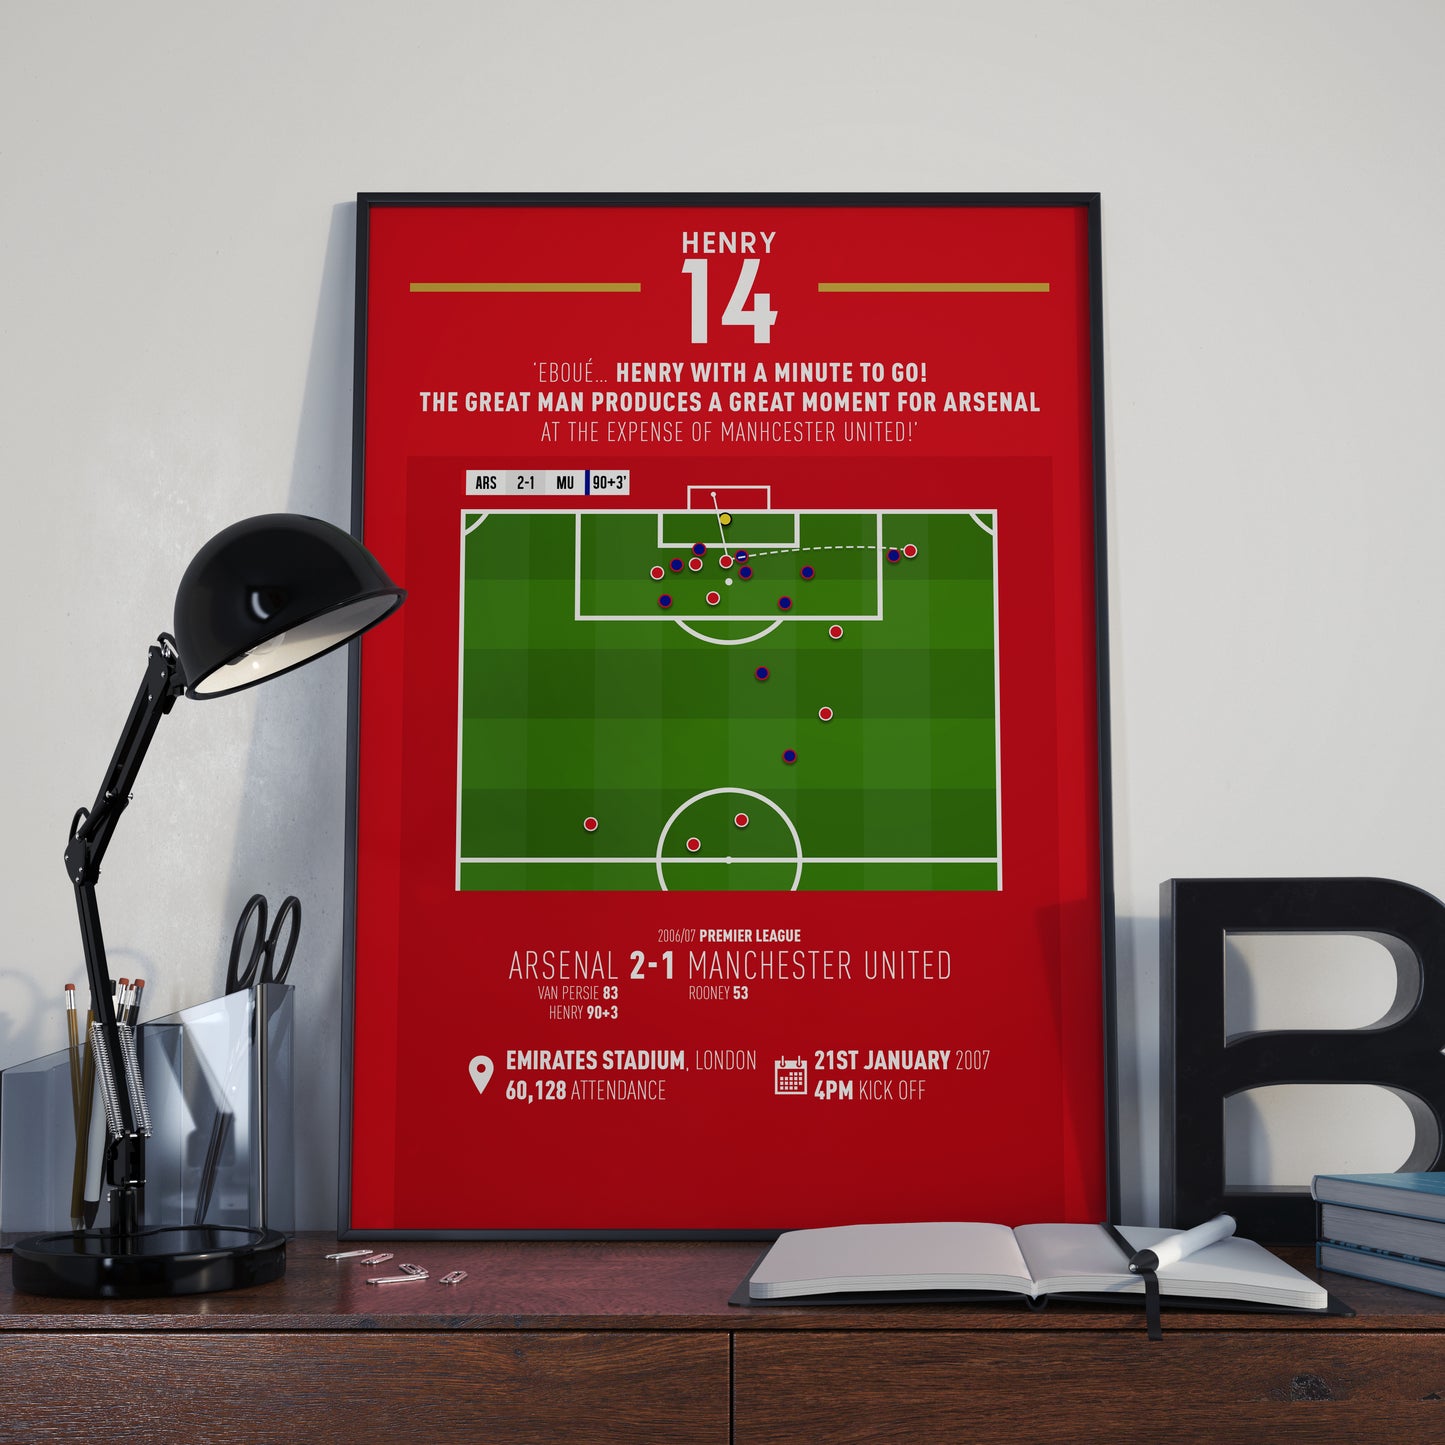 Thierry Henry | 93rd Minute Winner In Big Game (ARS 2-1 MU) Goal Print | Poster